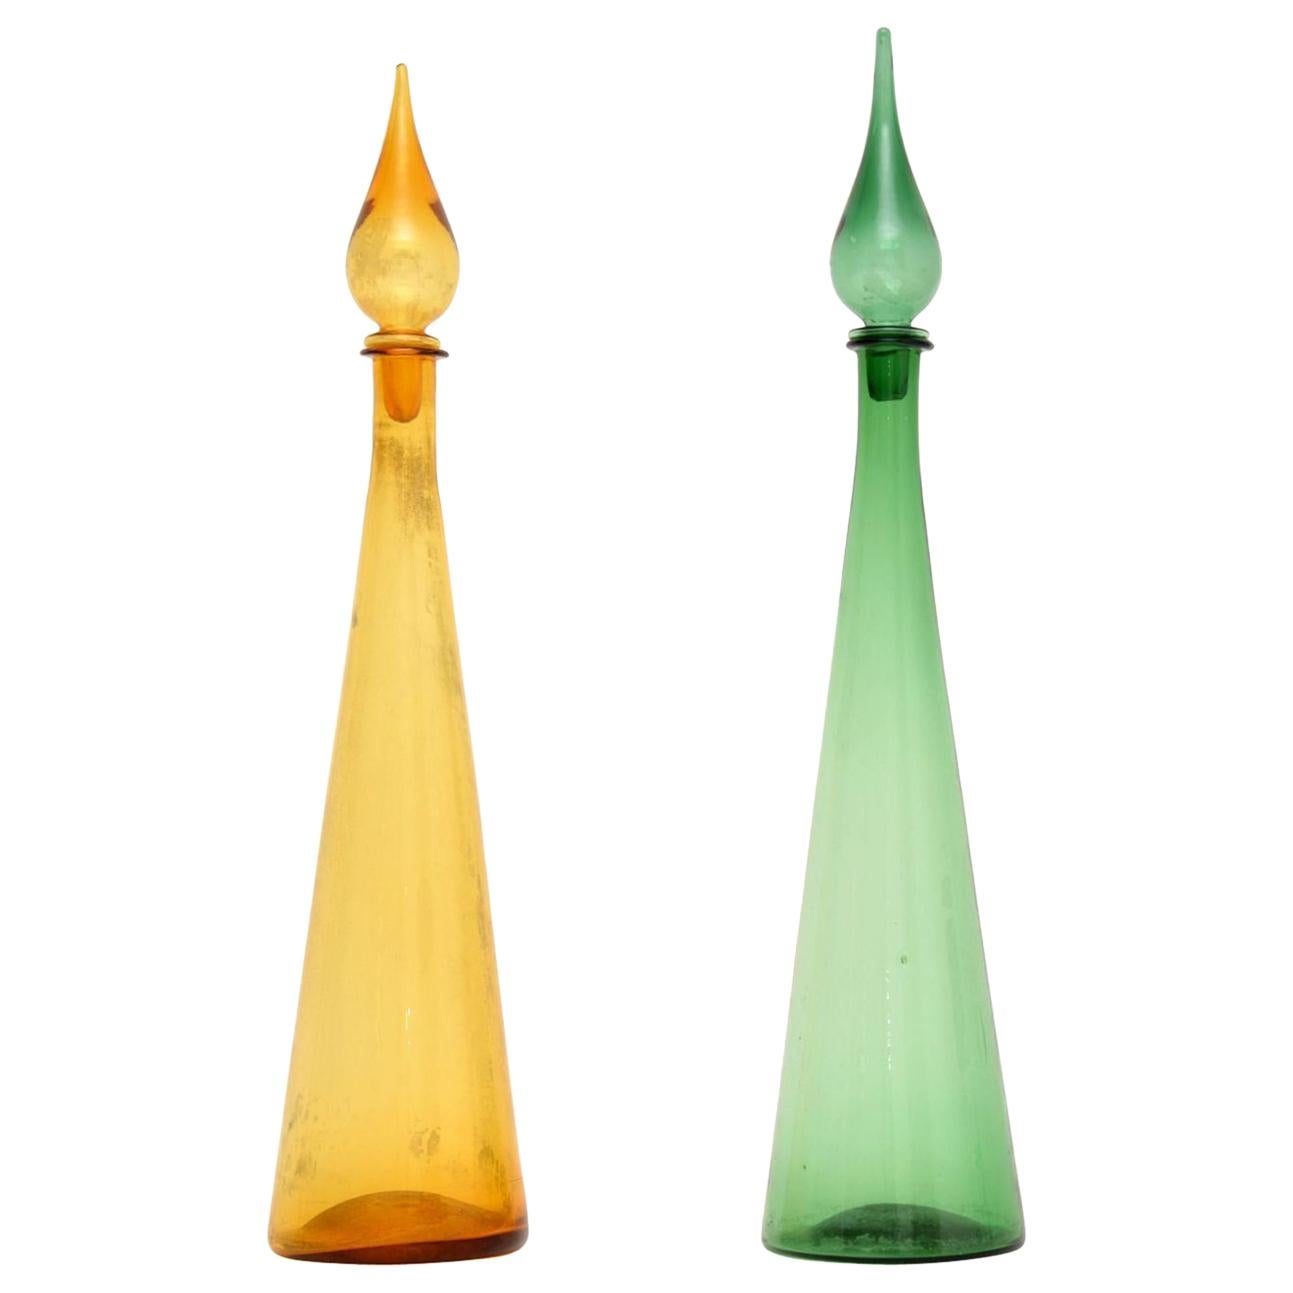 1960s Pair of Italian Vintage Glass Decanters